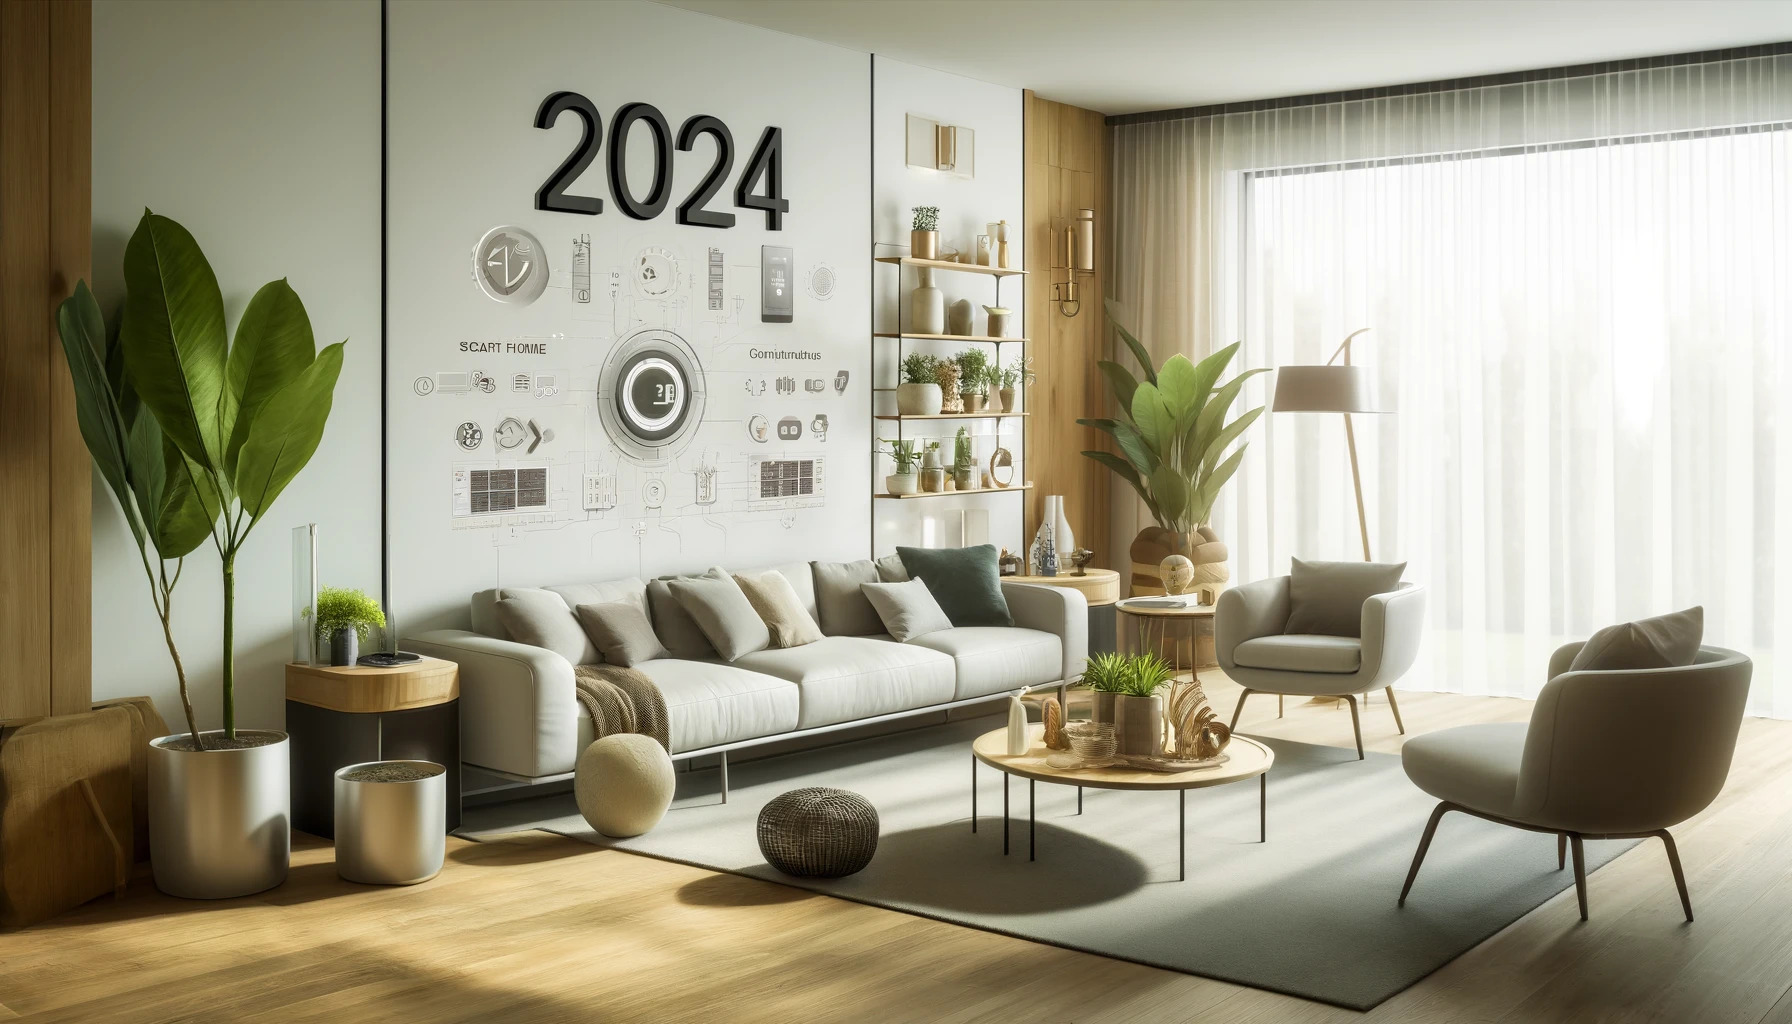 Home Improvement: How to Update Your Home in 2024